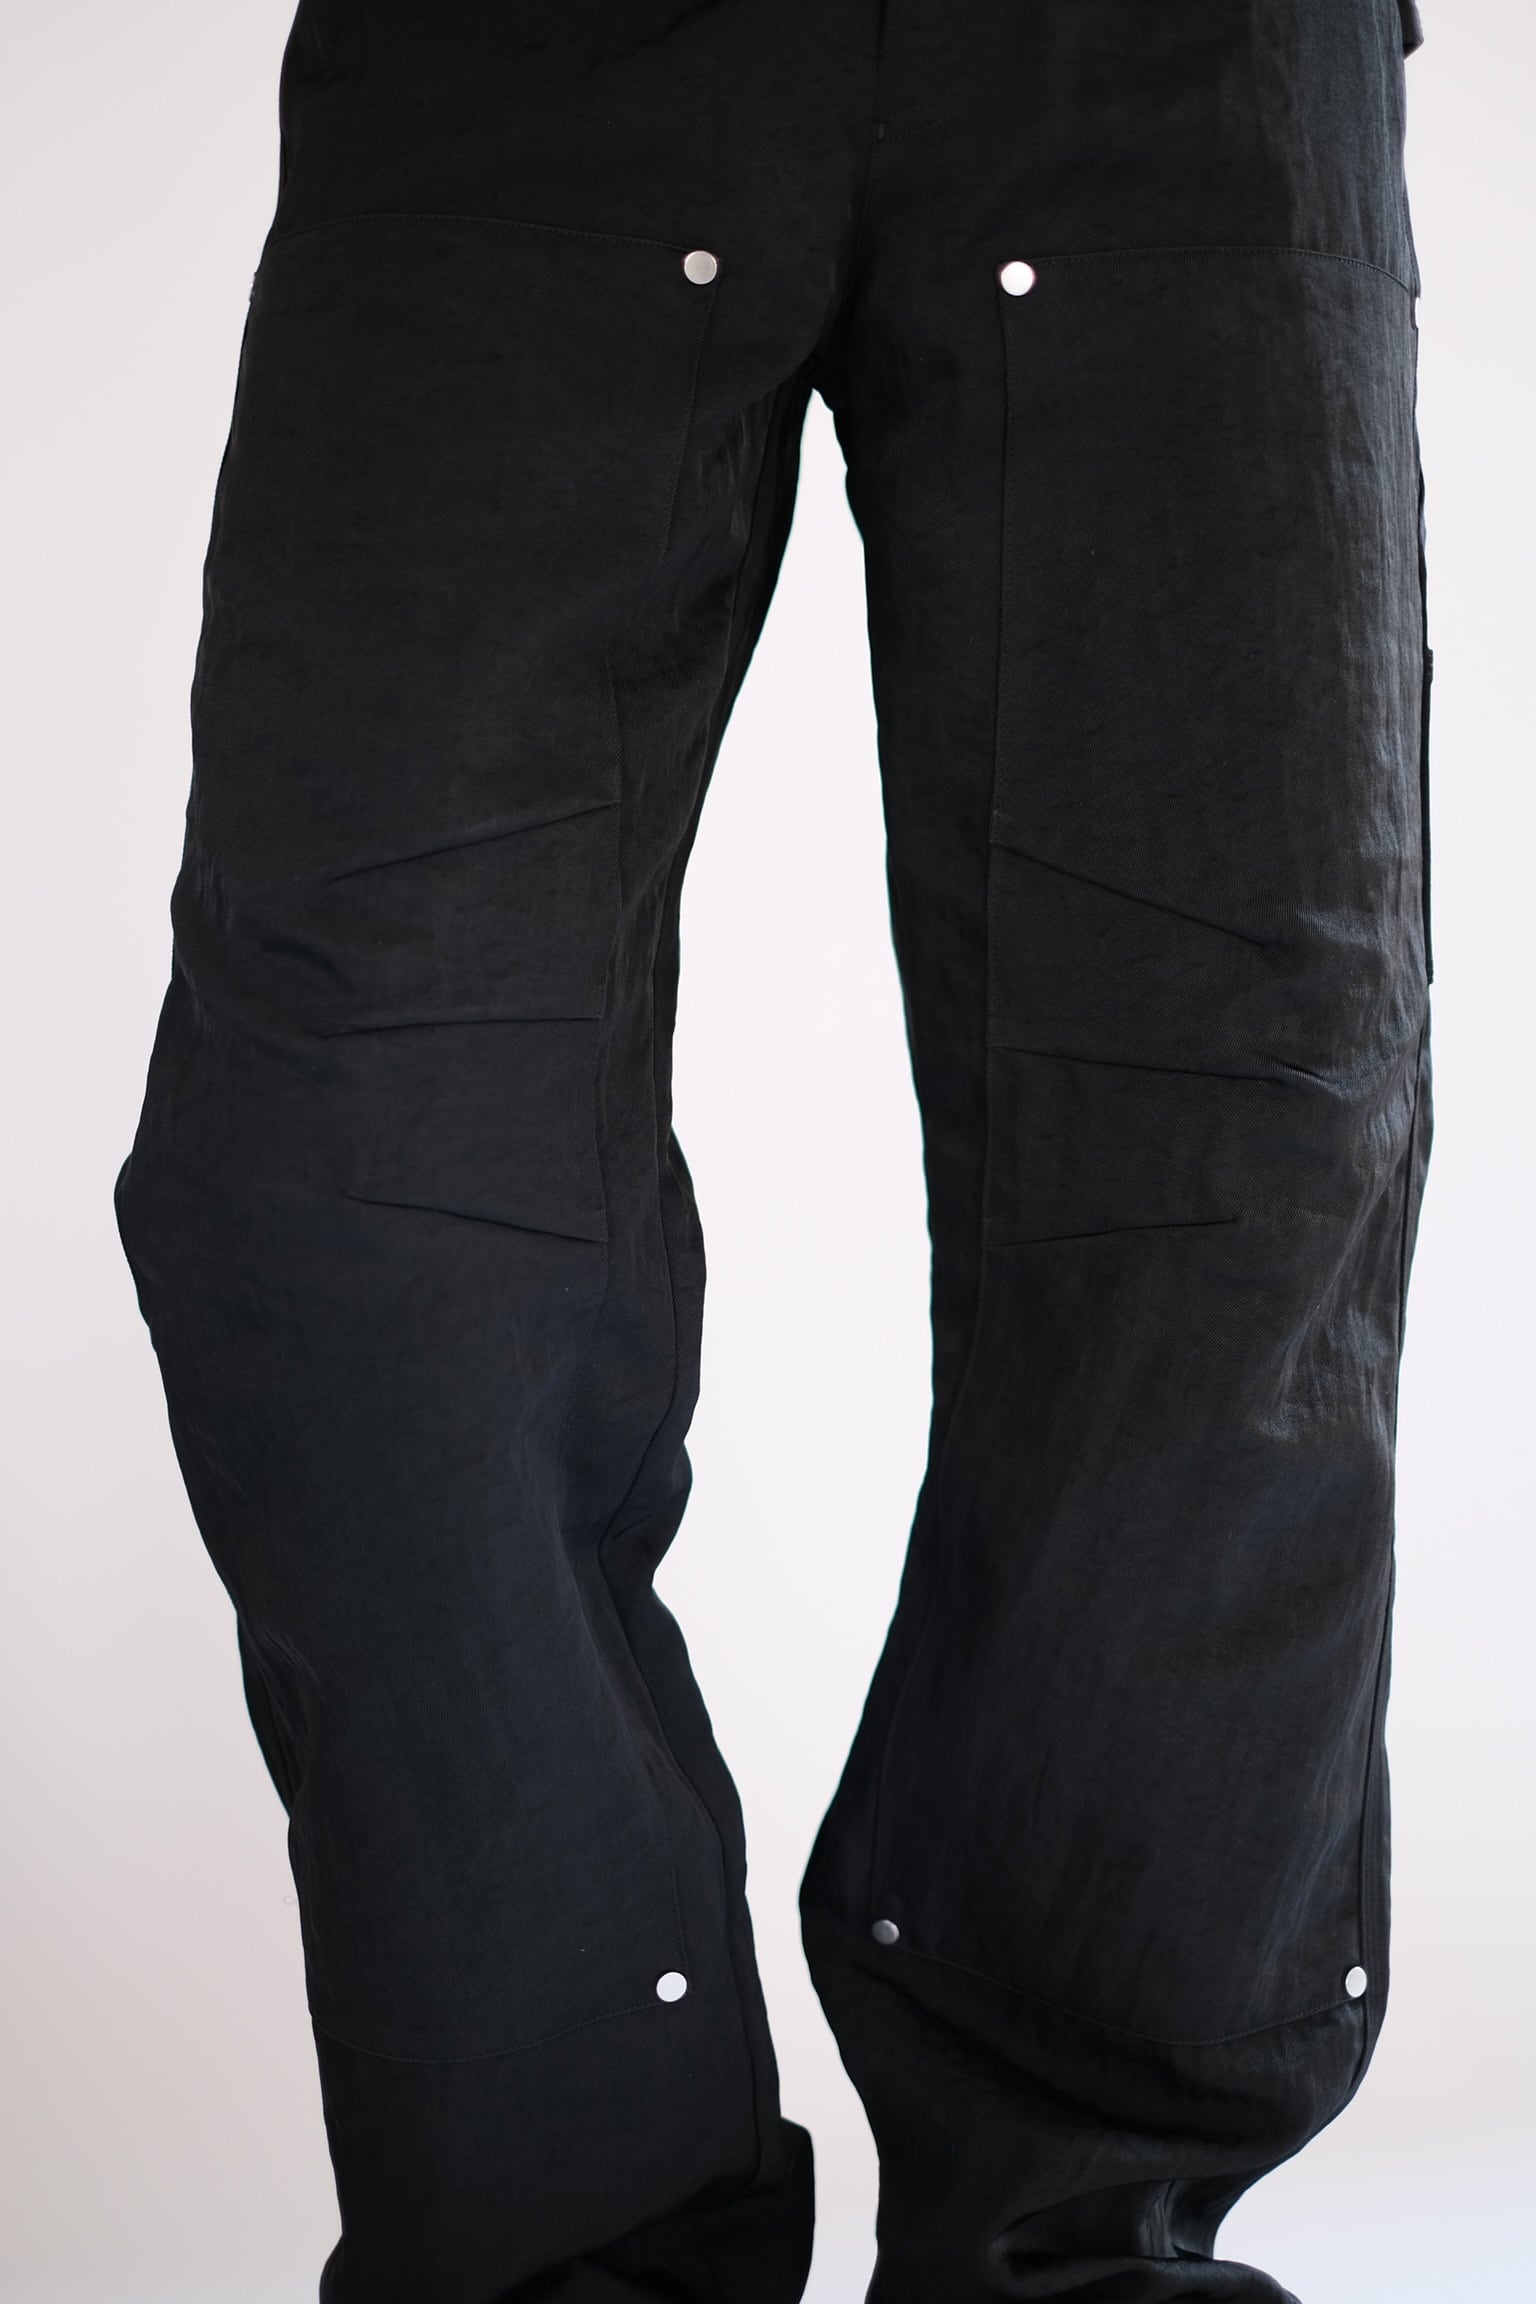 OUAT / -008- BLACK WORK TROUSERS | LIVING powered by BASE